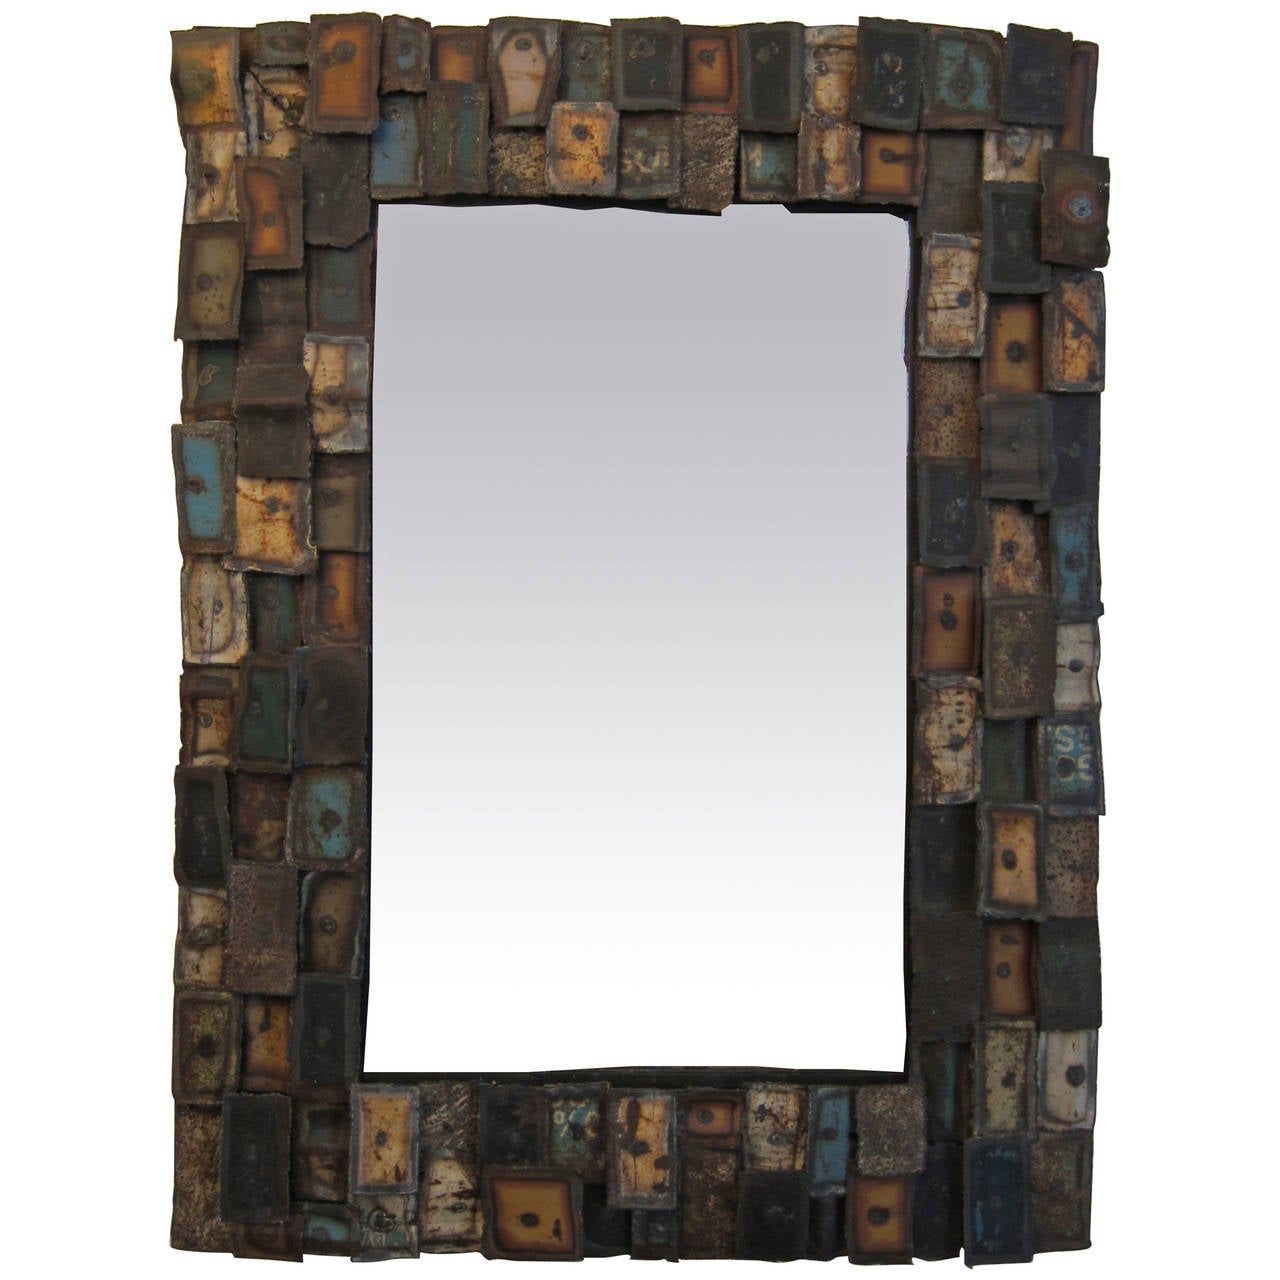 Torch Cut Patchwork Metal Wall Mirror At 1stdibs With Silver Metal Cut Edge Wall Mirrors (View 12 of 15)